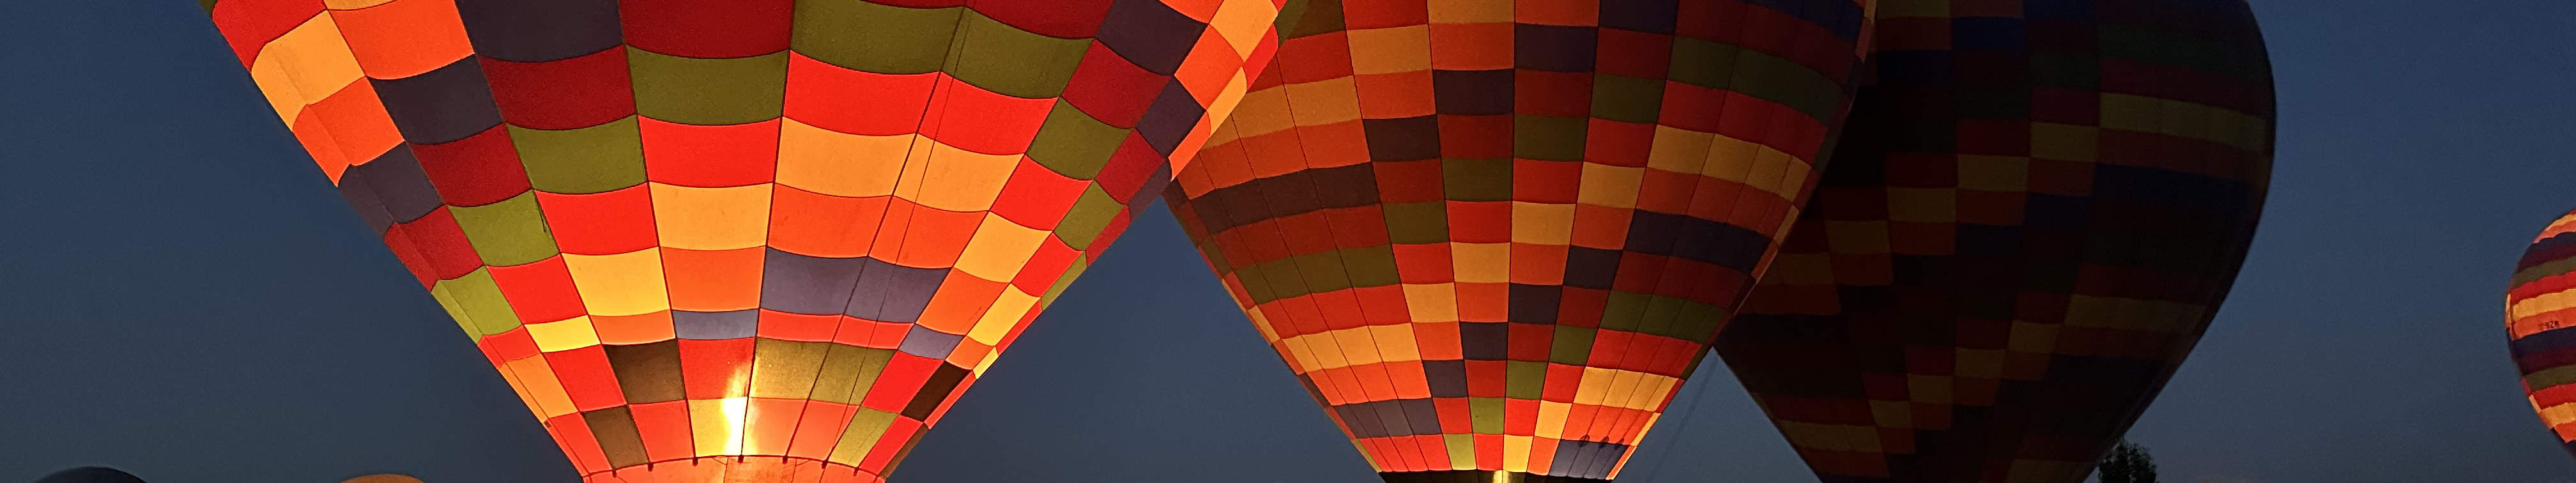 Experience the Magic of Sunrise from Above: Hot Air Balloon Tour ...